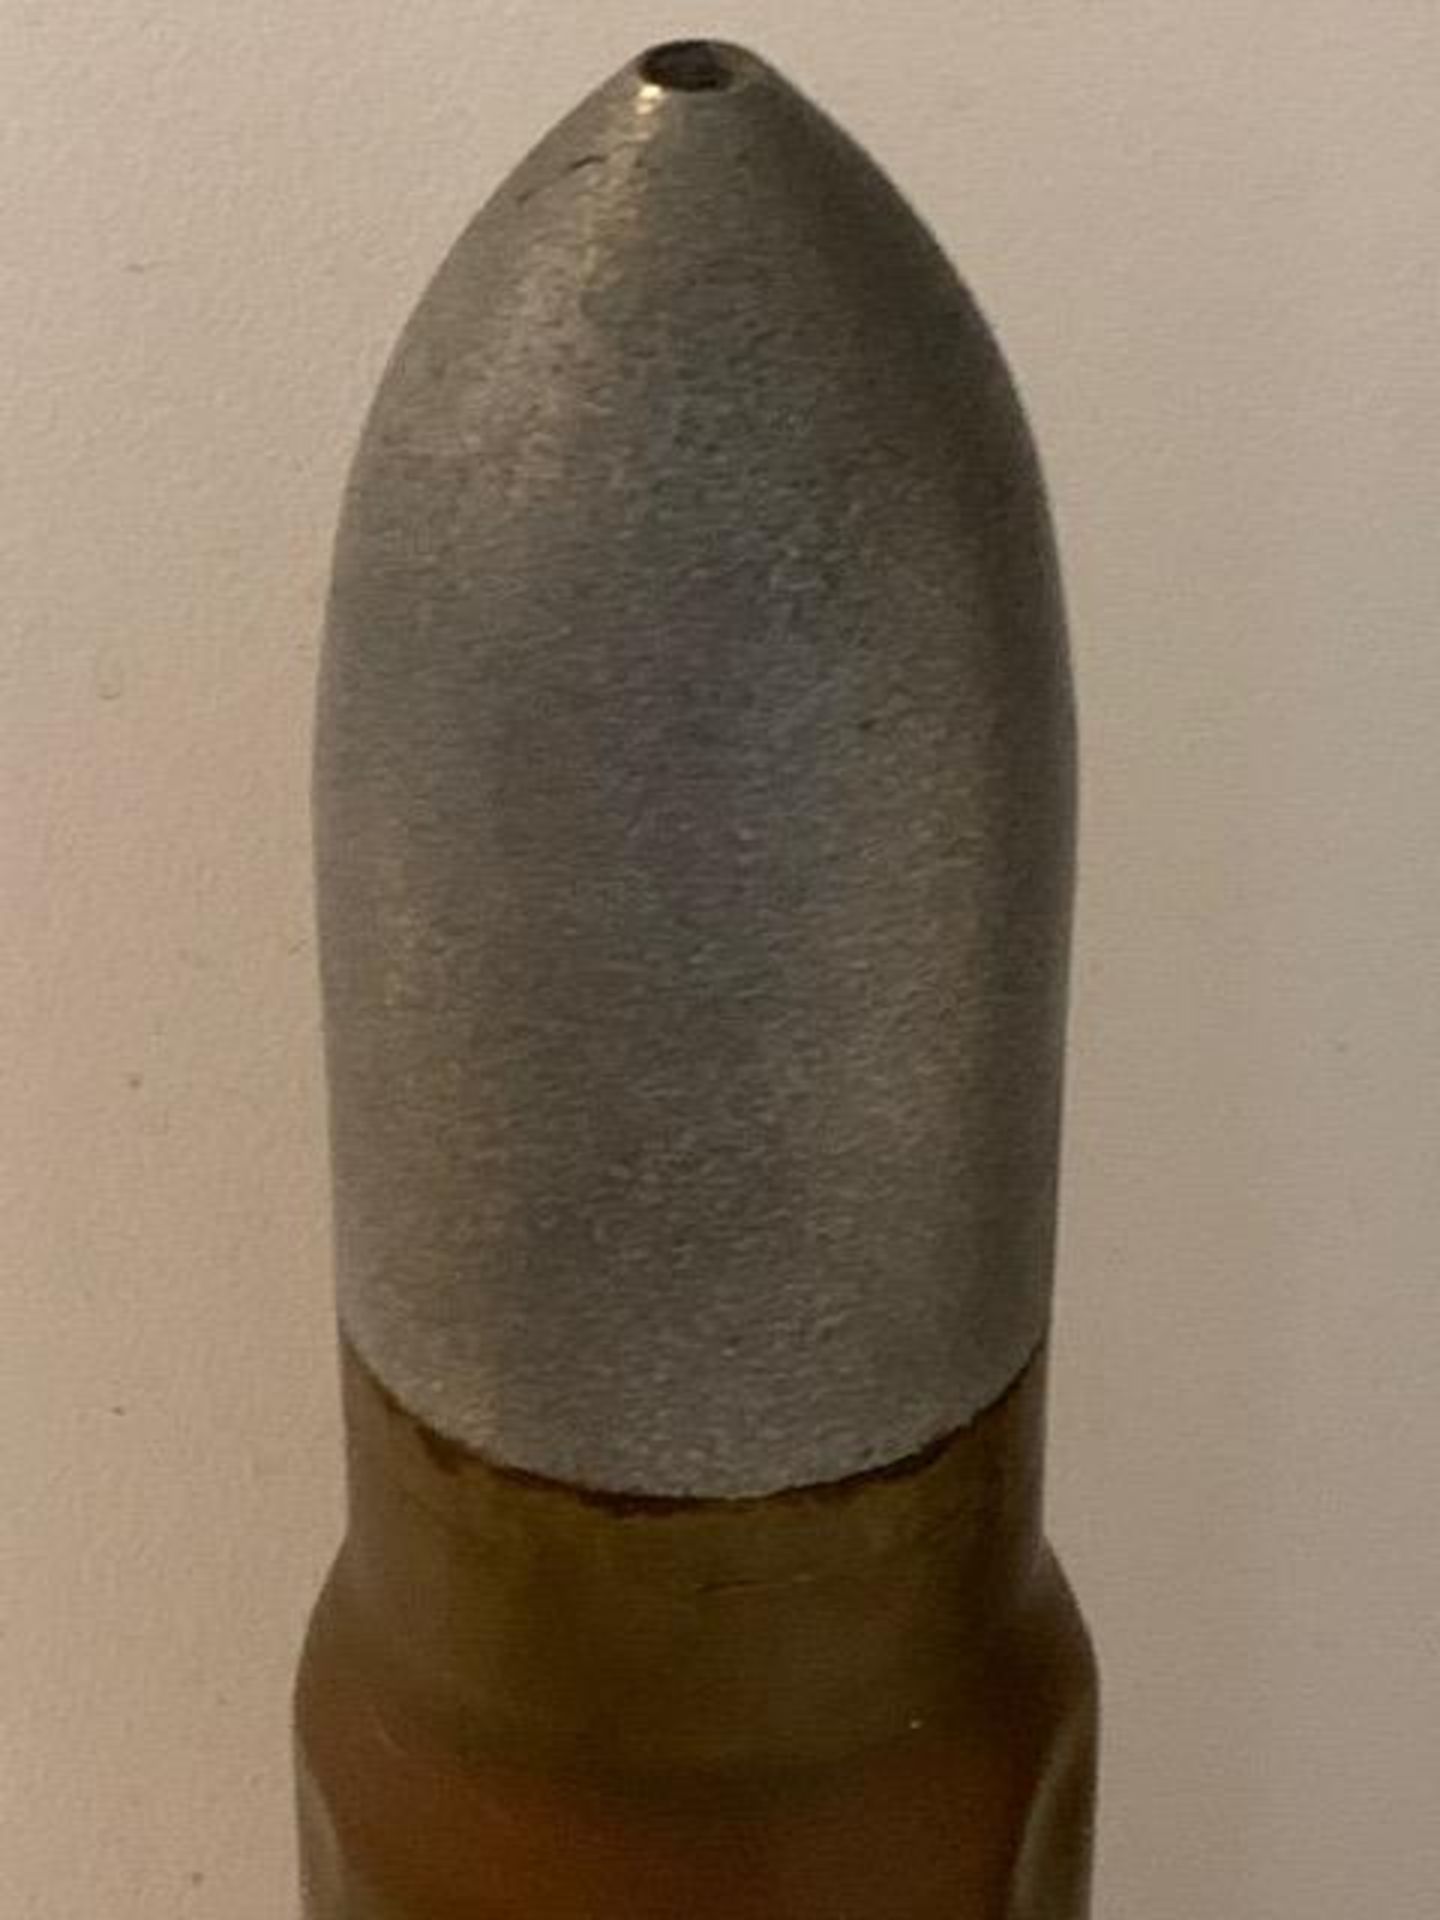 VINTAGE WW2 TRAINING ARTILLERY SHELL - MK7 MOD1 - 50 CALIBER DATED 4-1943 - US NAVY STAMPED - Image 2 of 5